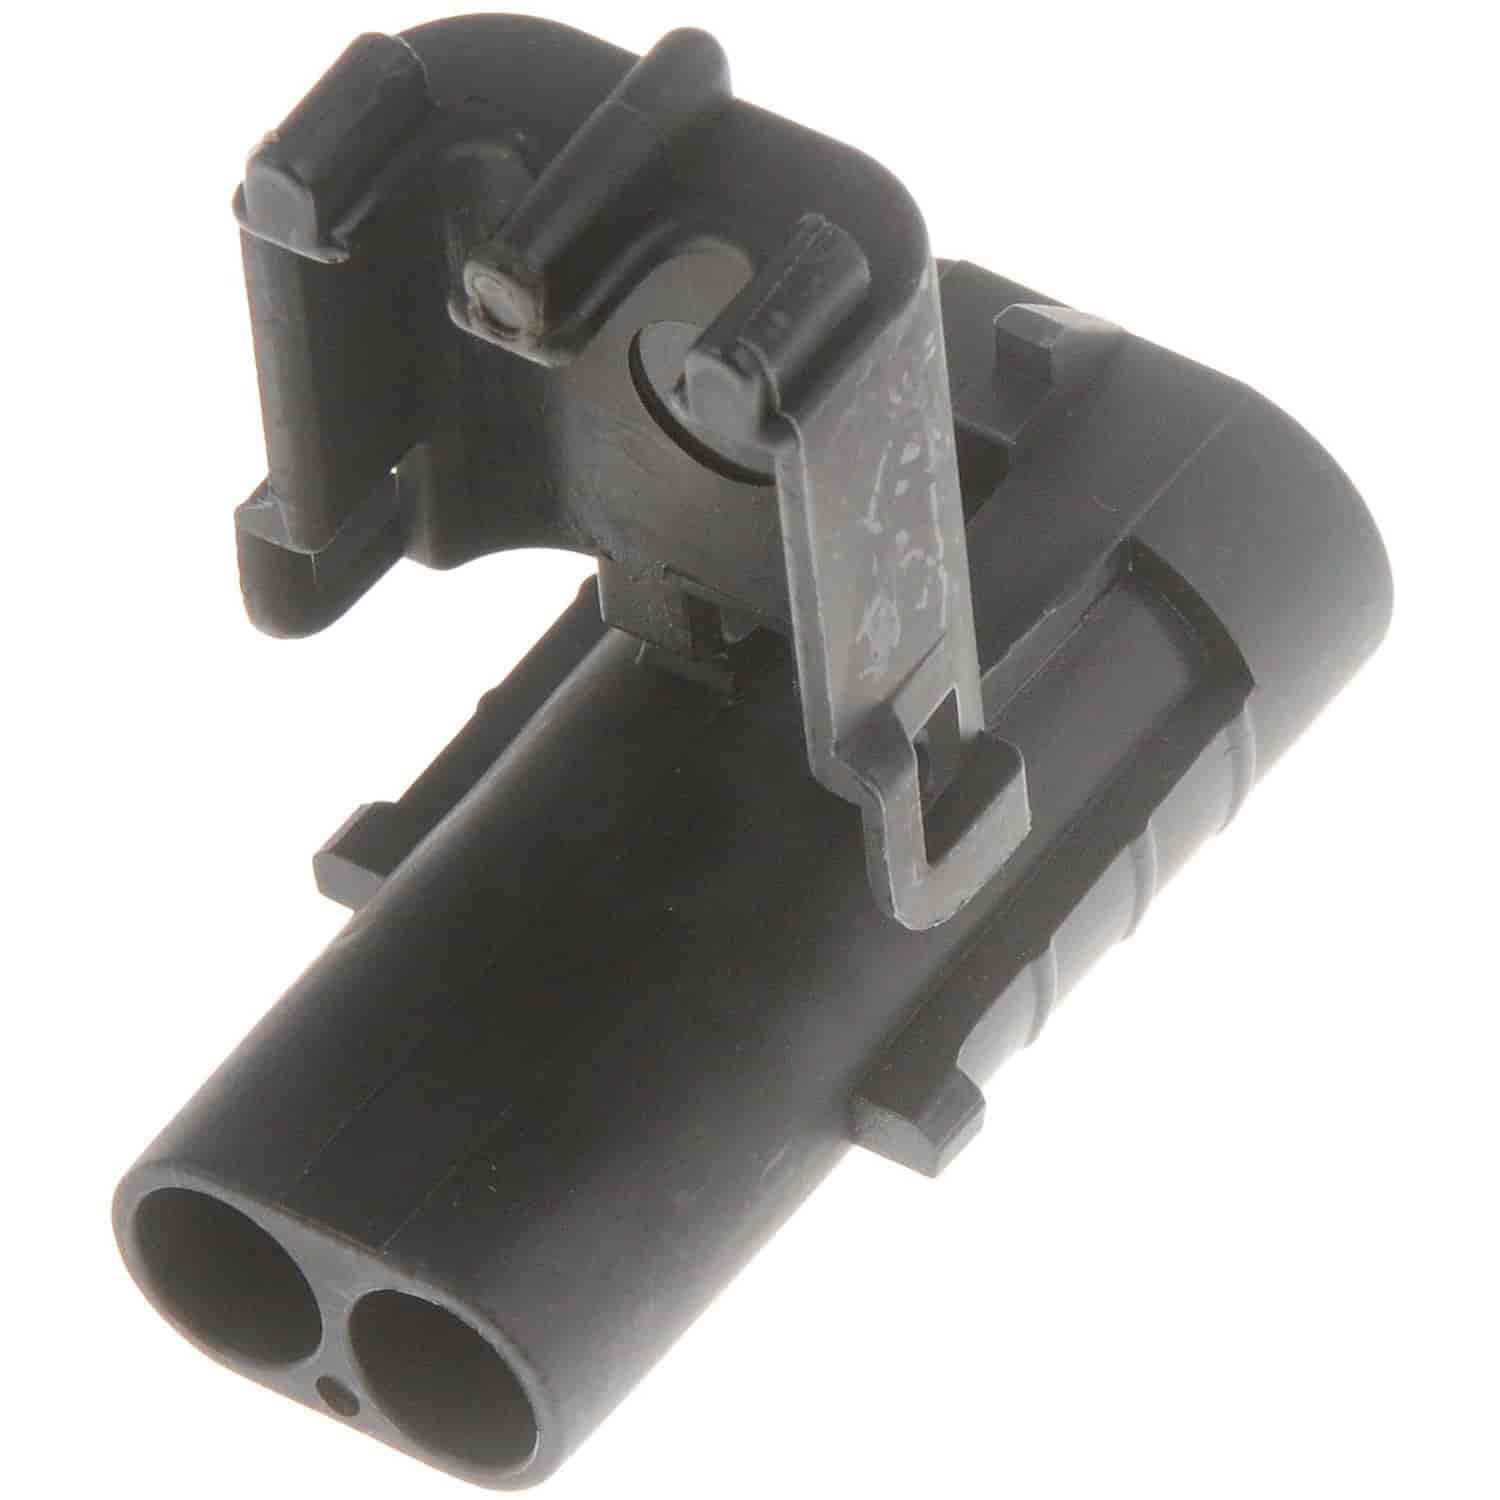 Male Shroud Housing Weather Pack Connector Terminal 1.681"